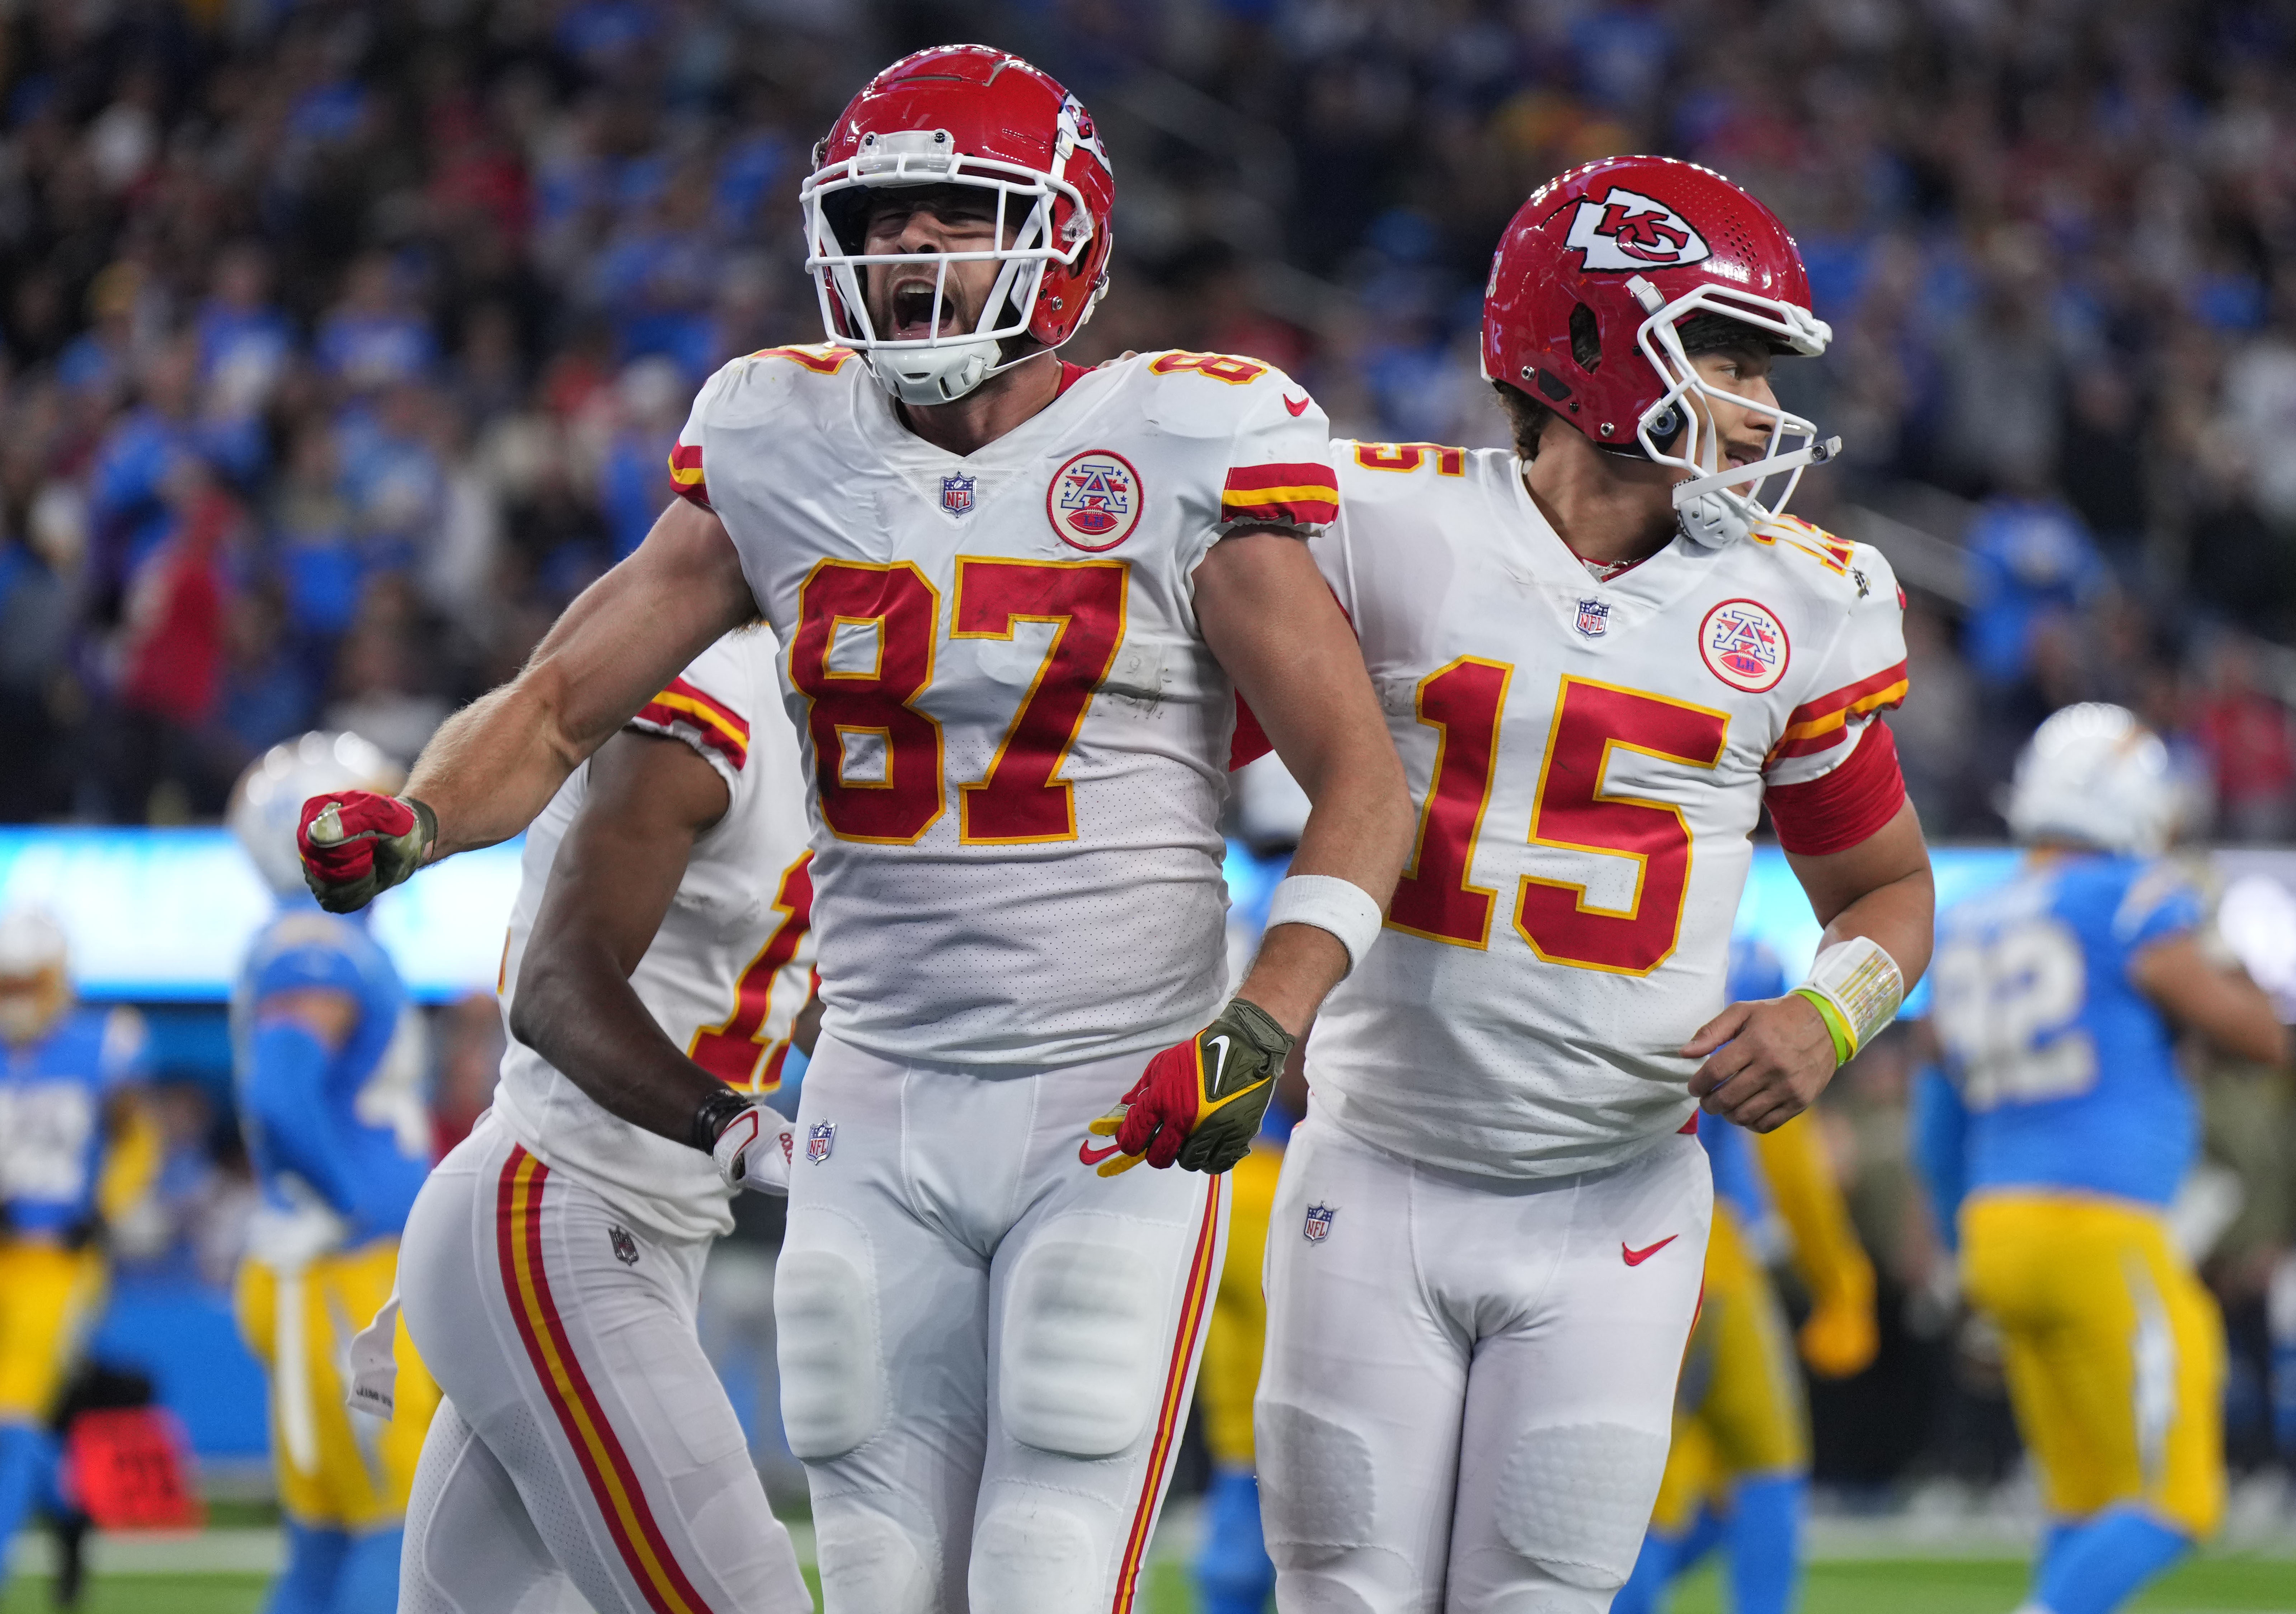 Seahawks Must Contain Mahomes, Stop Kelce